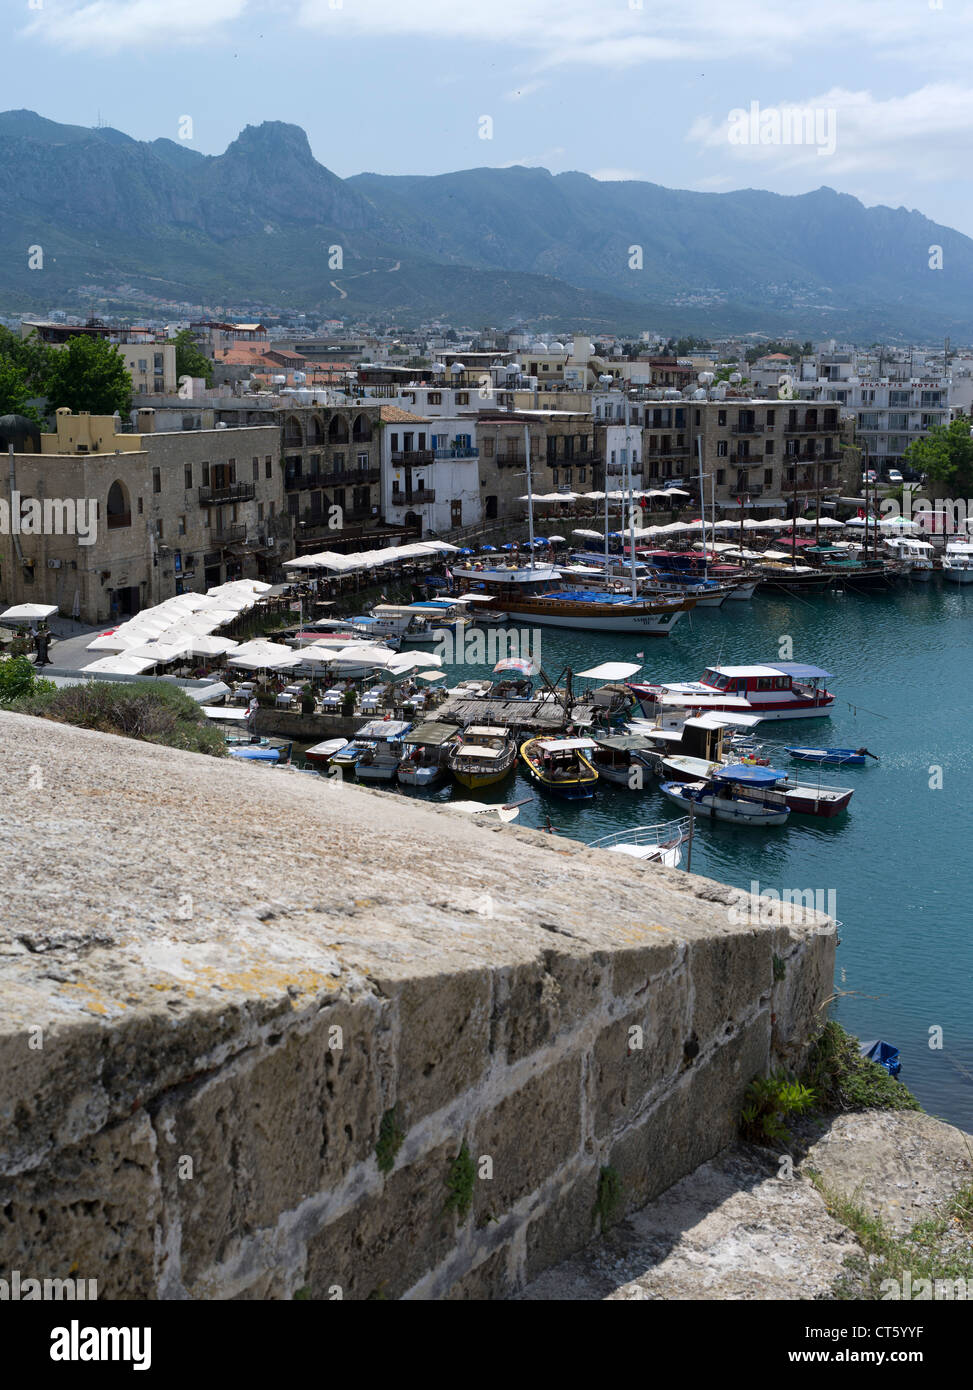 dh Girne Castle KYRENIA NORTHERN CYPRUS Venetian castle walls old harbour and Besparmak mountains Stock Photo